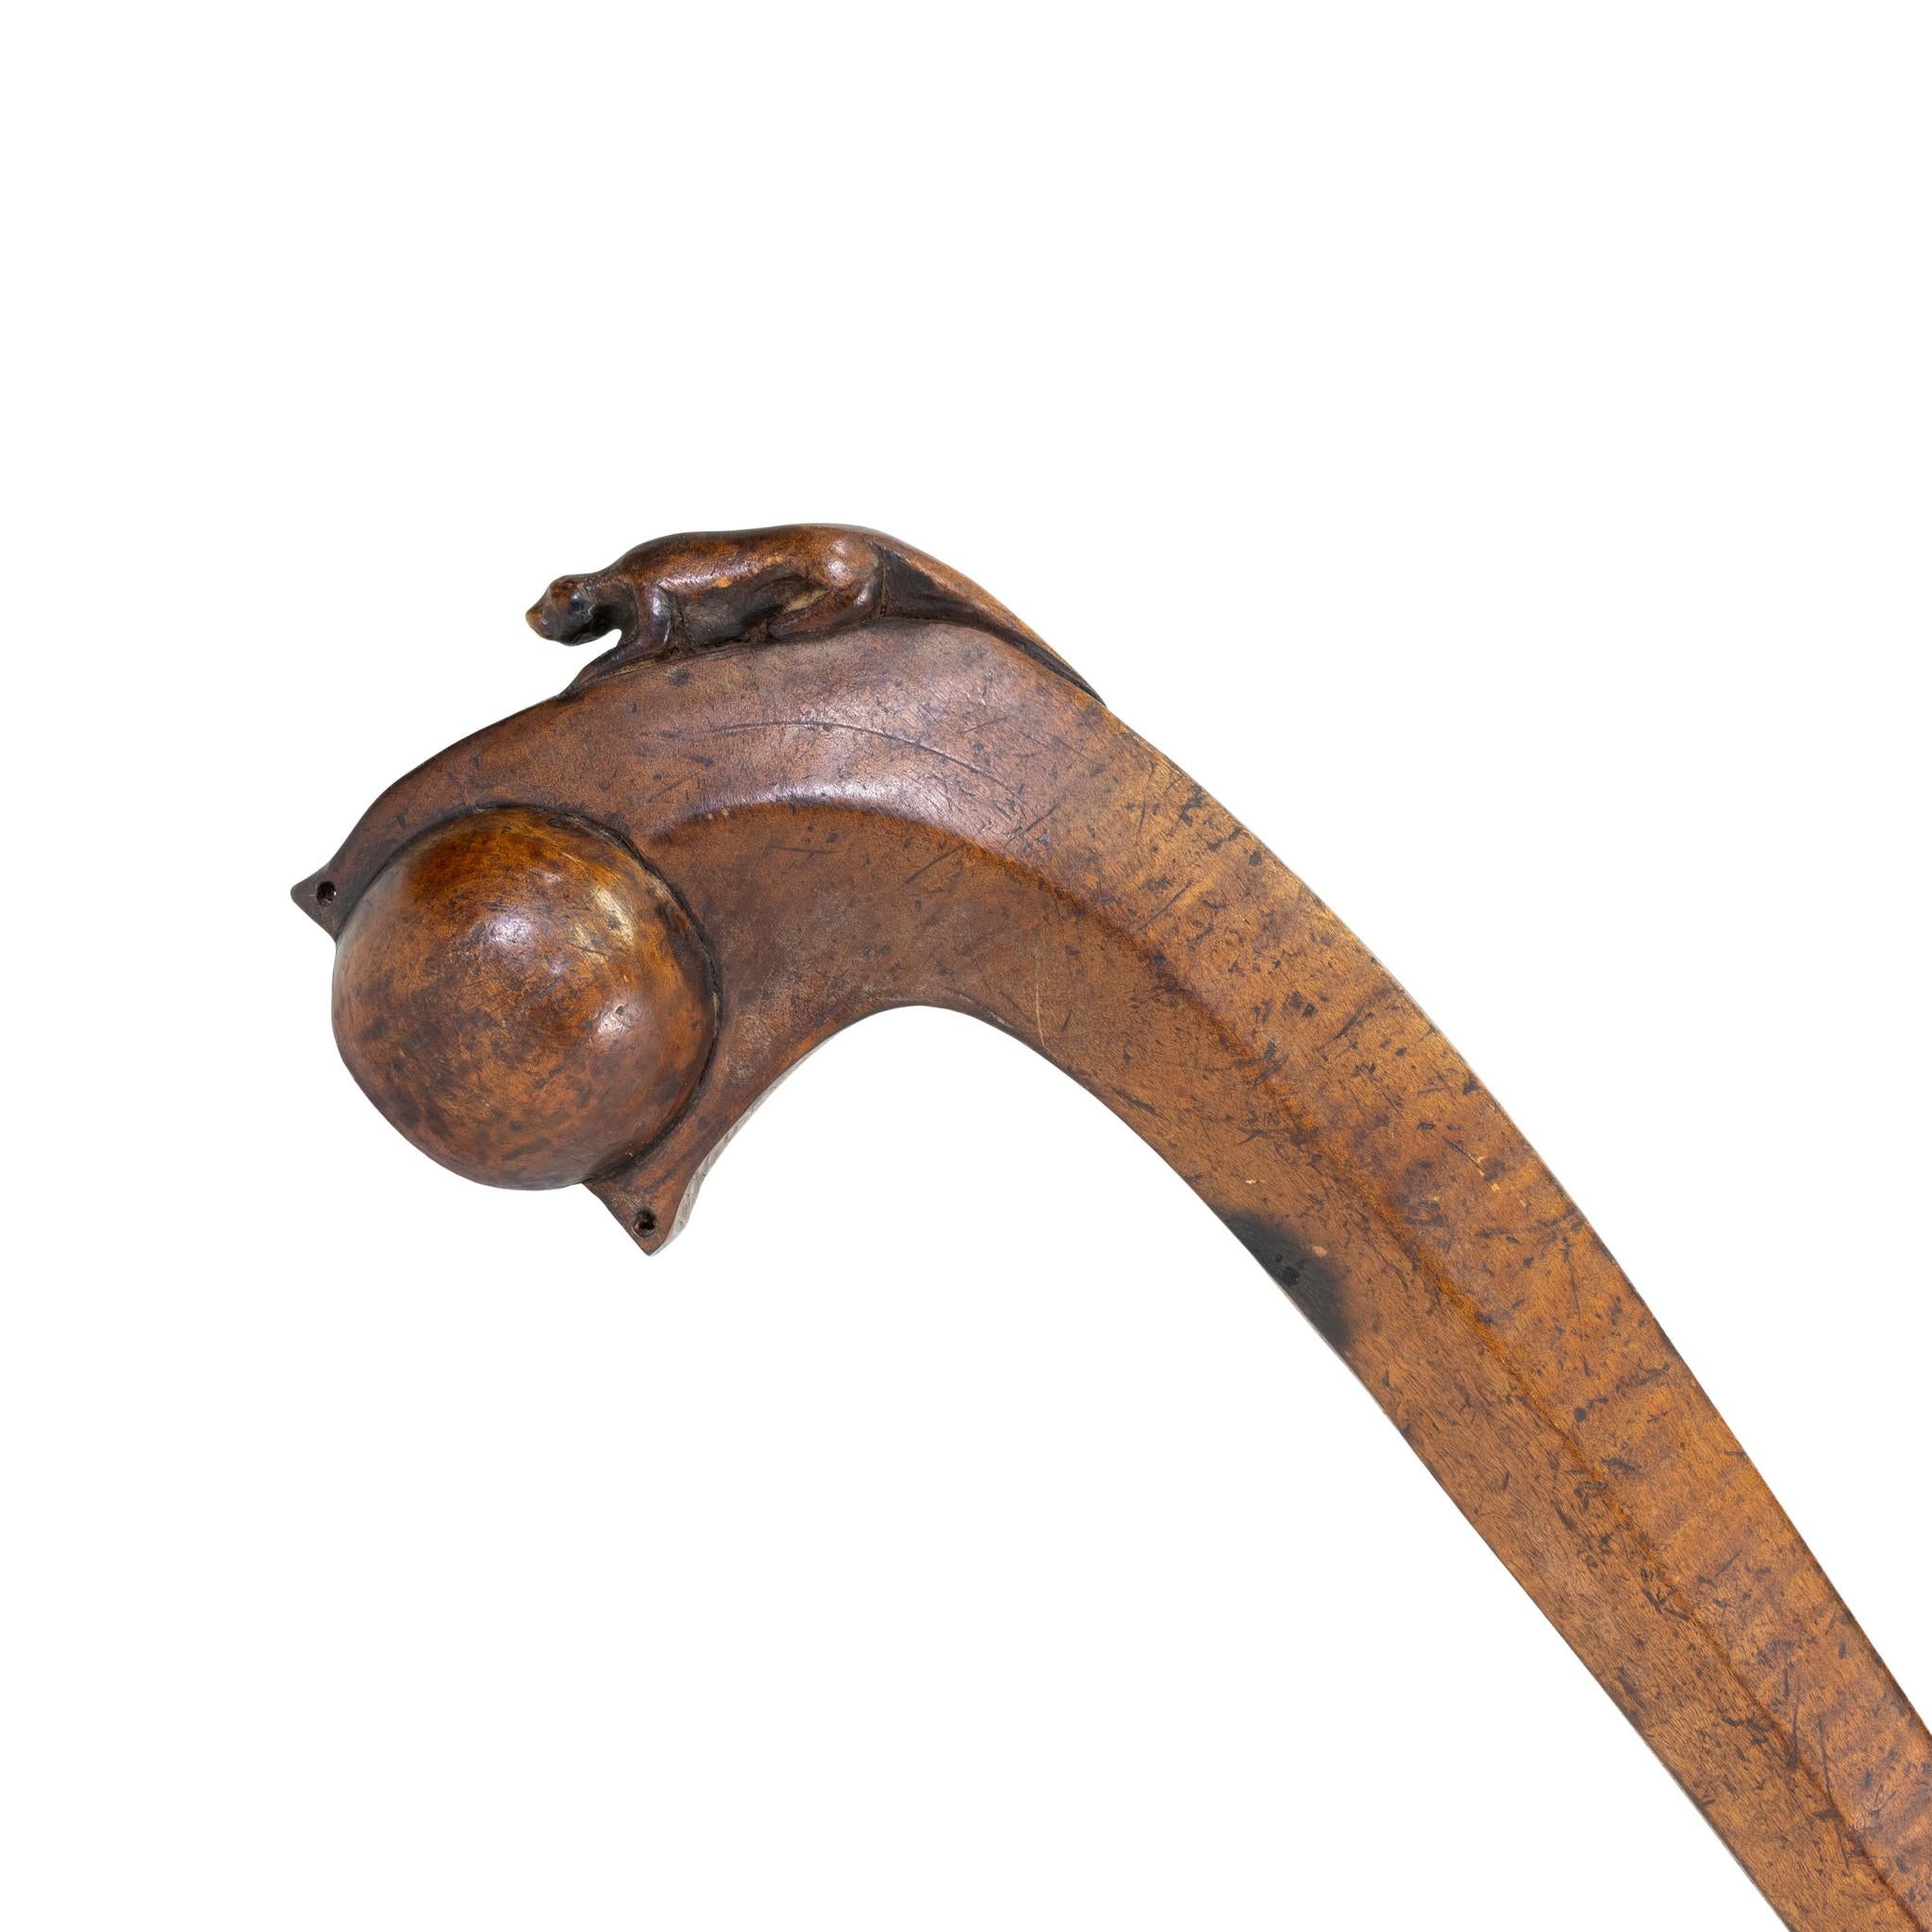 Ball headed war club of walnut with carved panther effigy. The panther is rare and a powerful warrior symbol that has different interpretations 